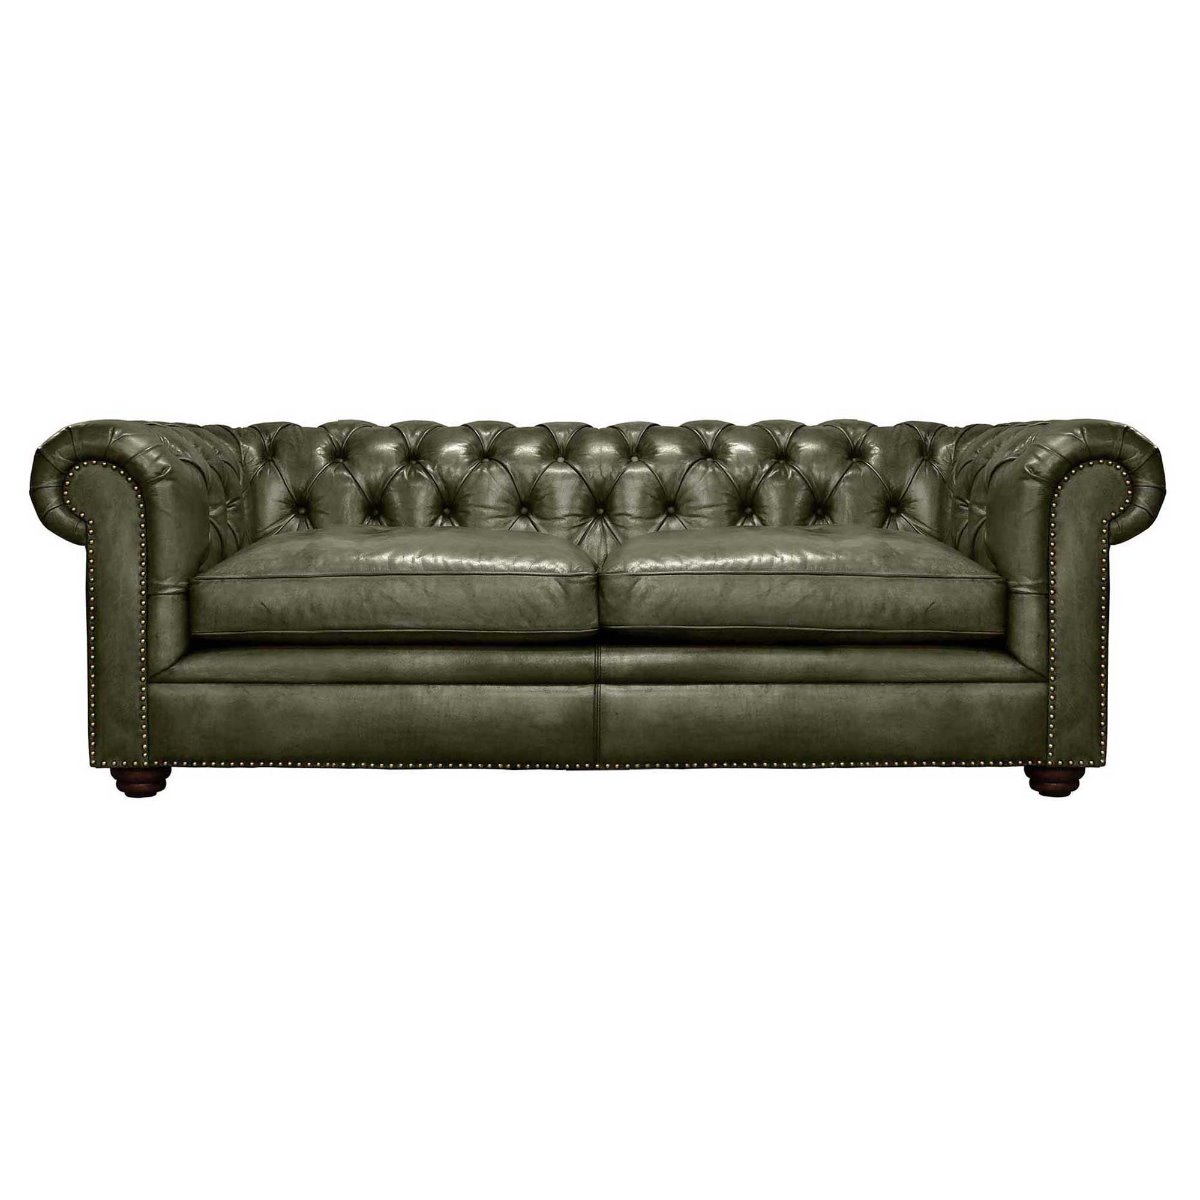 Pure Furniture Winslow Chesterfield Sofa 210cm With Wooden Legs, Green Leather | Barker & Stonehouse